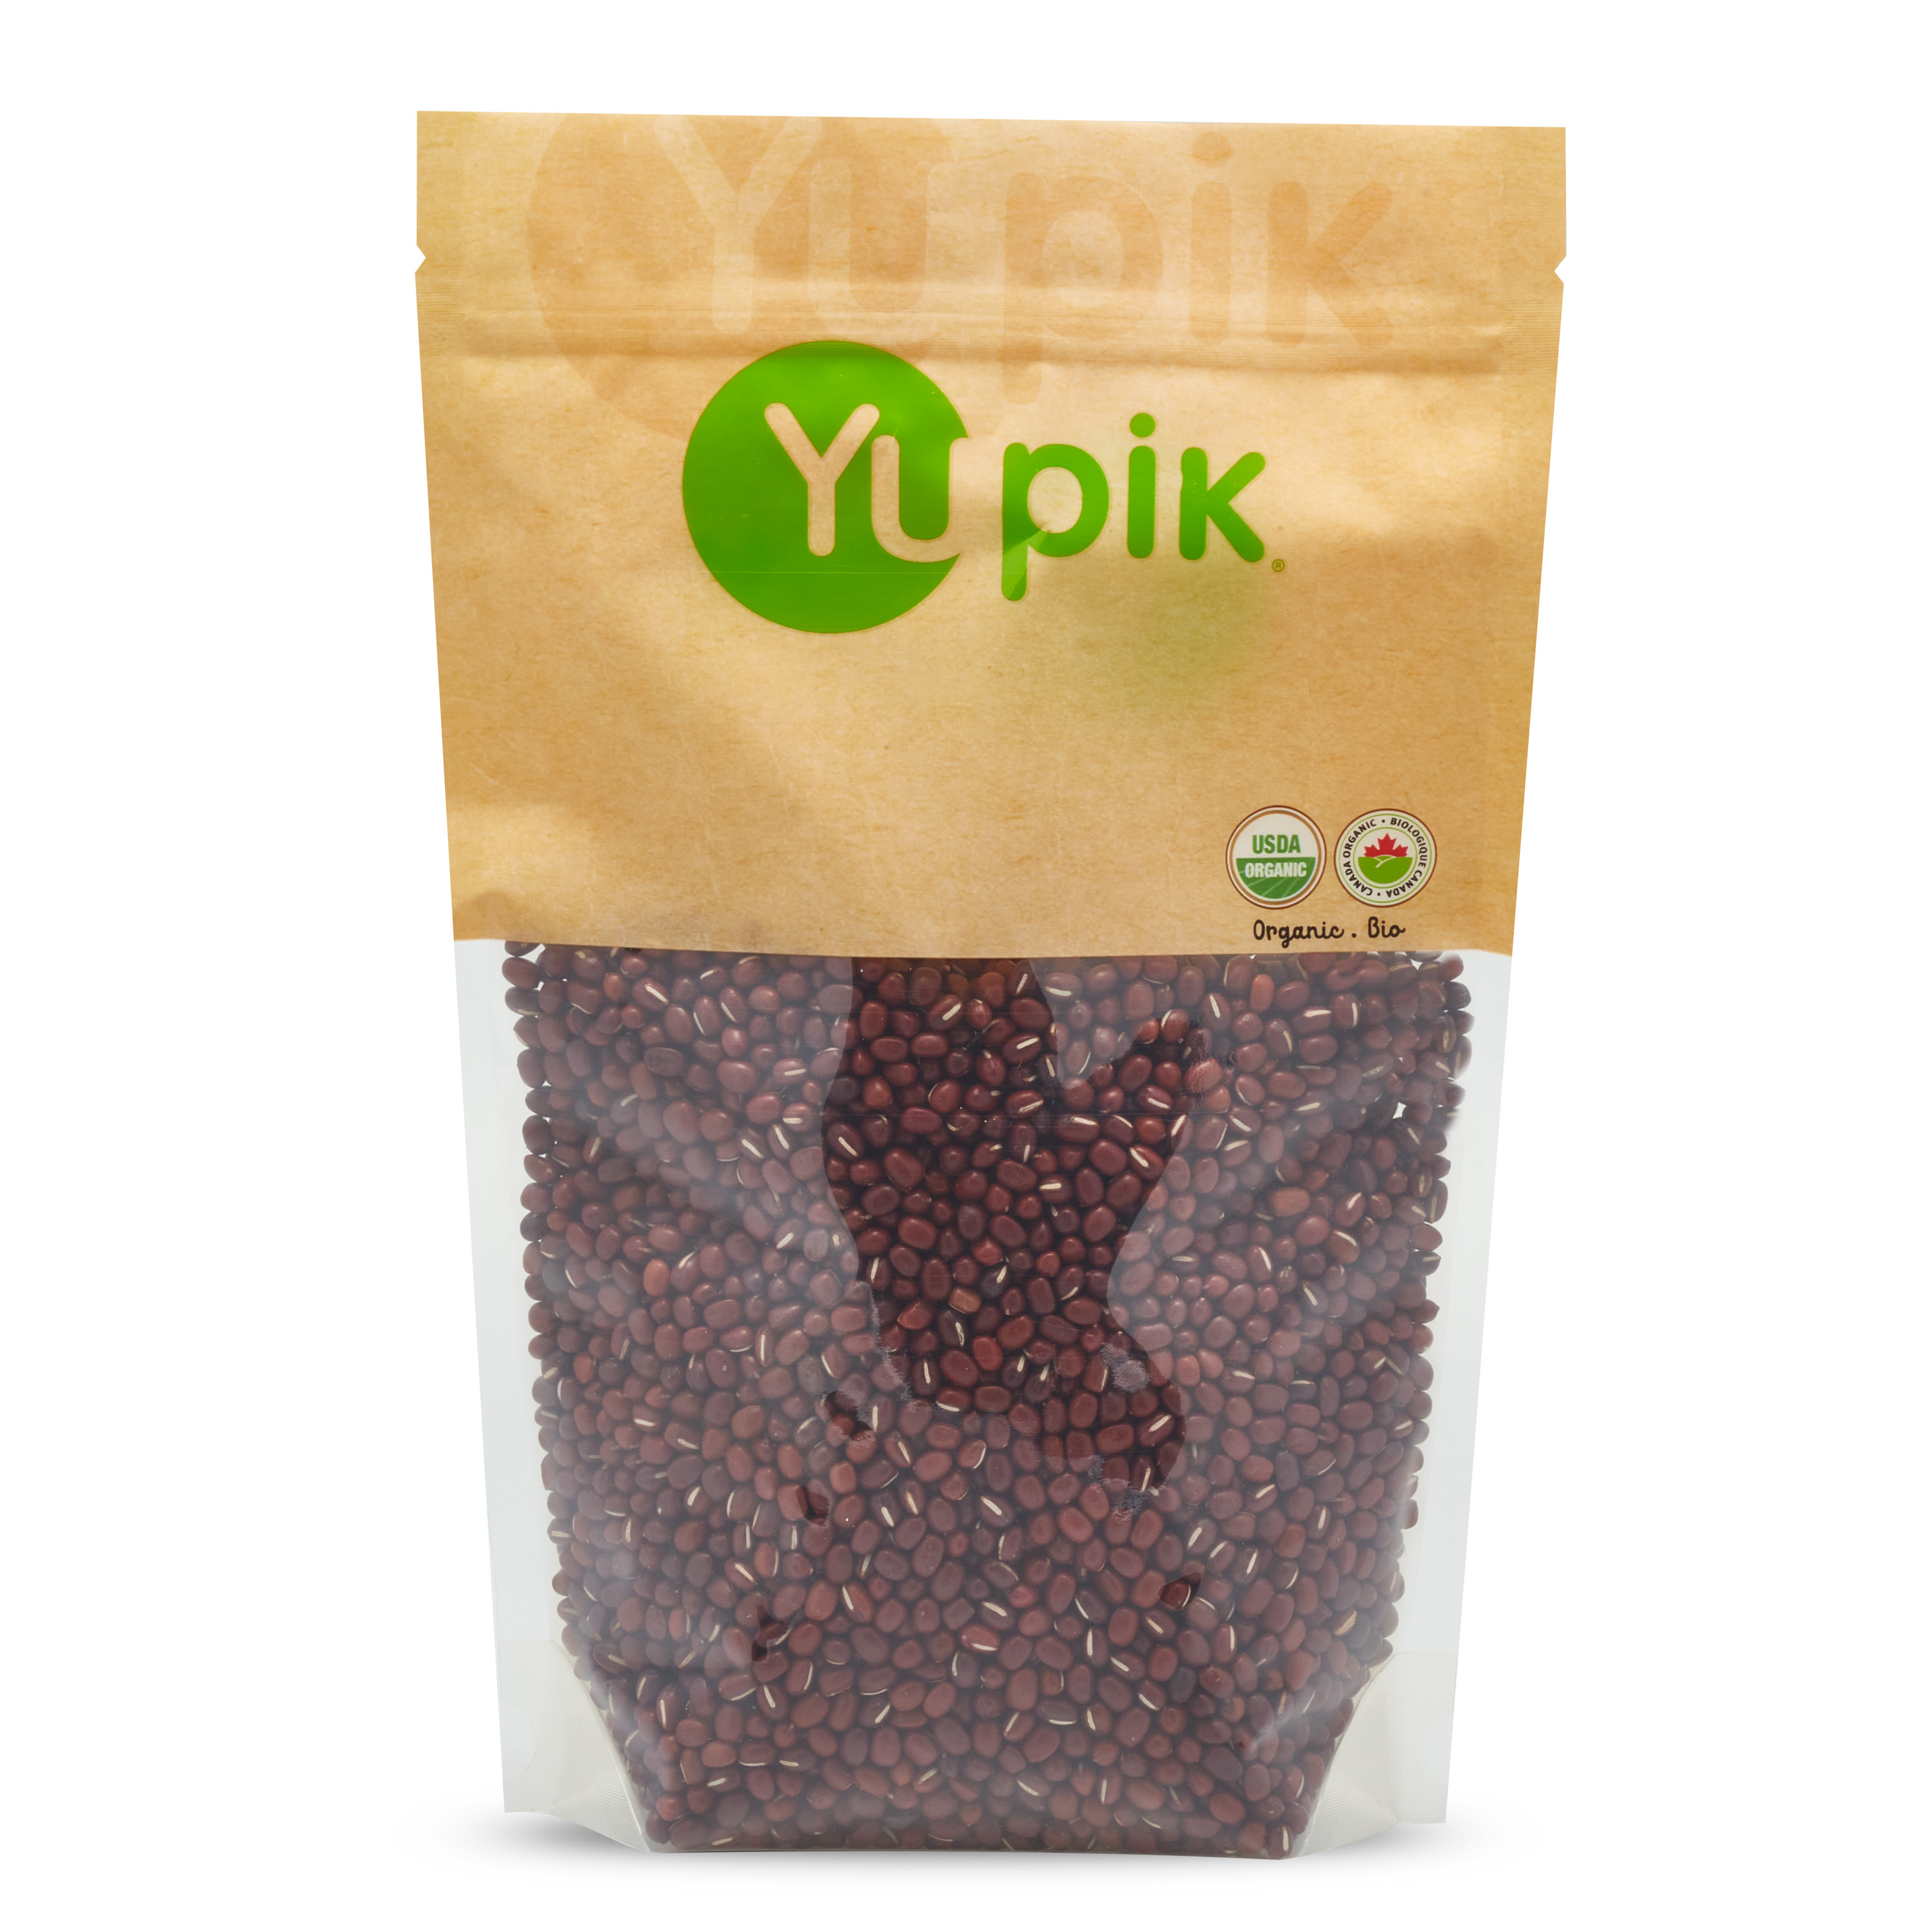 Organic adzuki beans.It is a raw agriculture product. Although it has been mechanically cleaned before packaging, some foreign material may be present. Sort and wash before using.